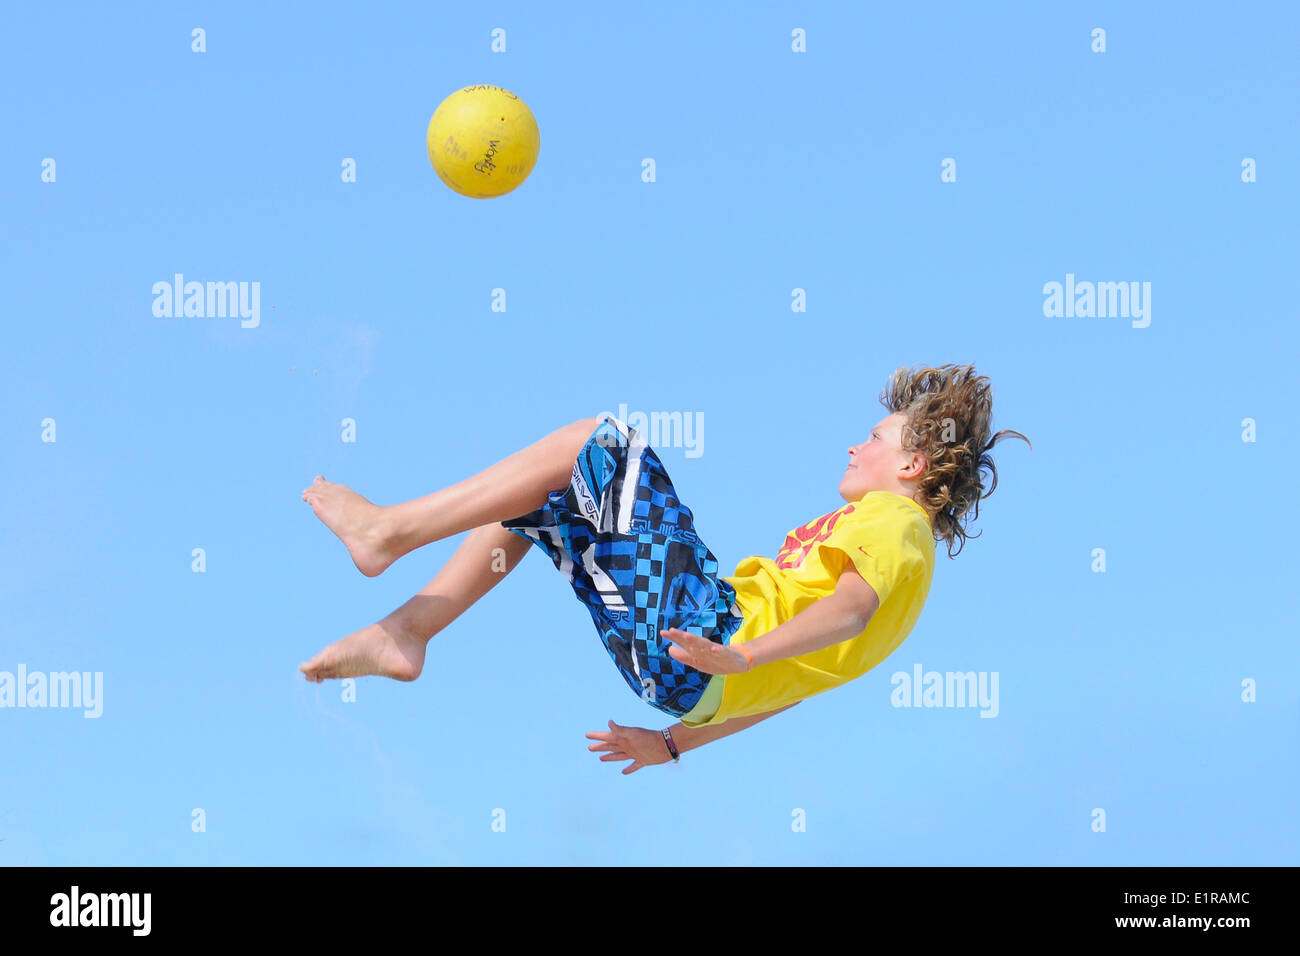 Boy makes bicycle kick in the air Stock Photo